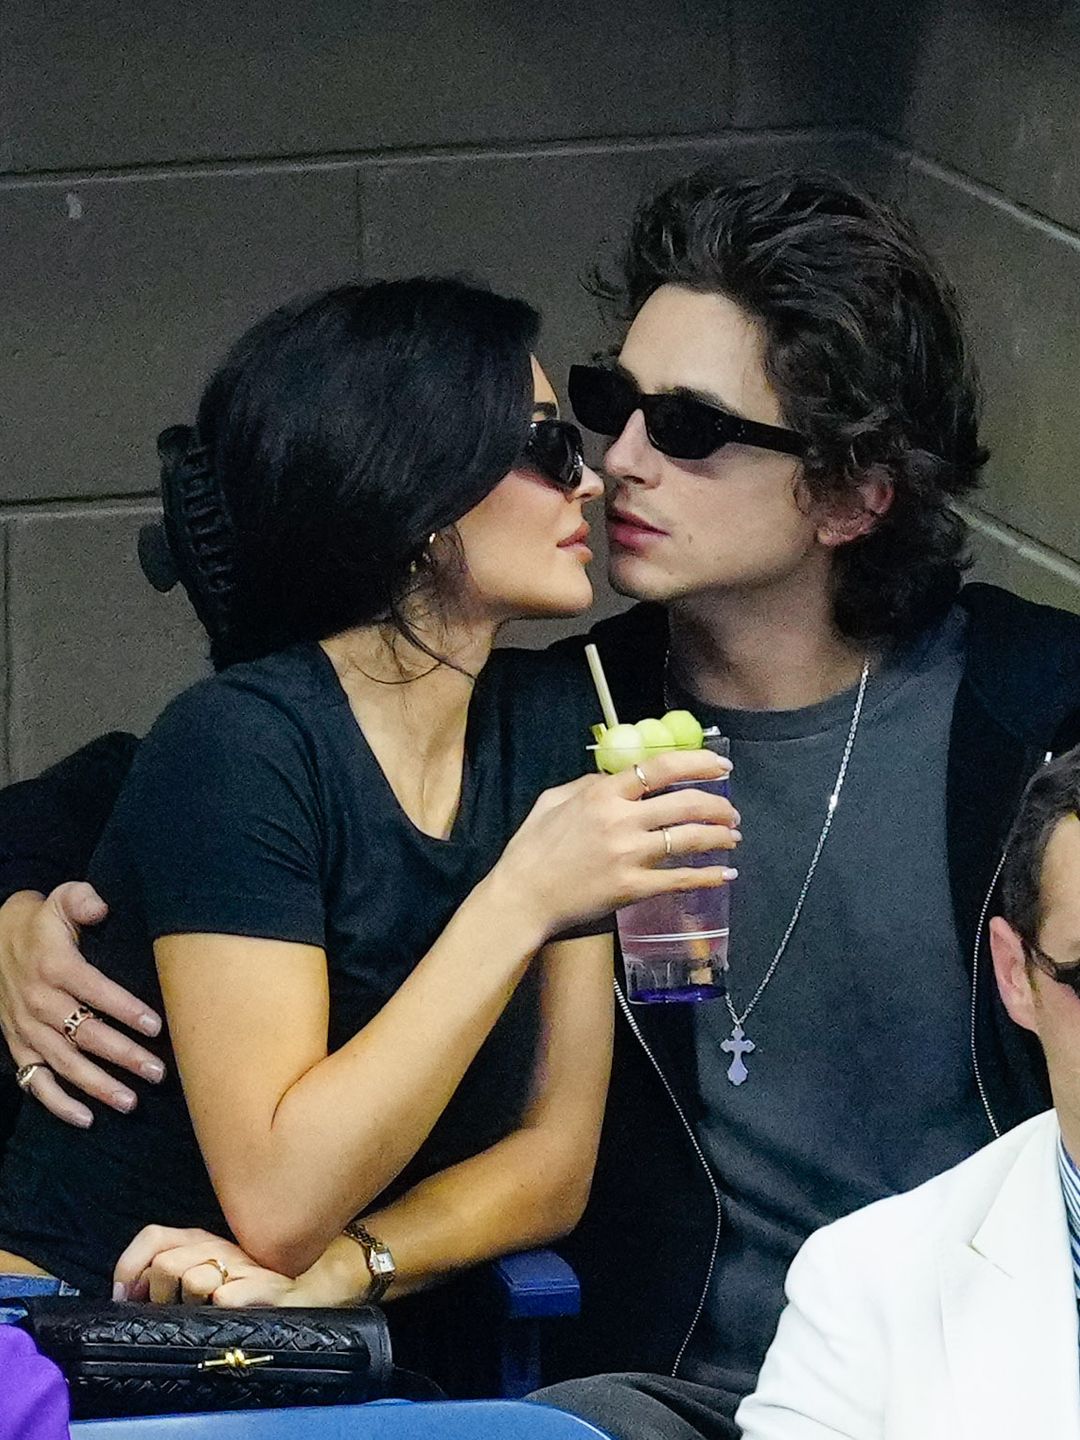 Kylie Jenner and Timothée Chalamet kissing at the US Open 